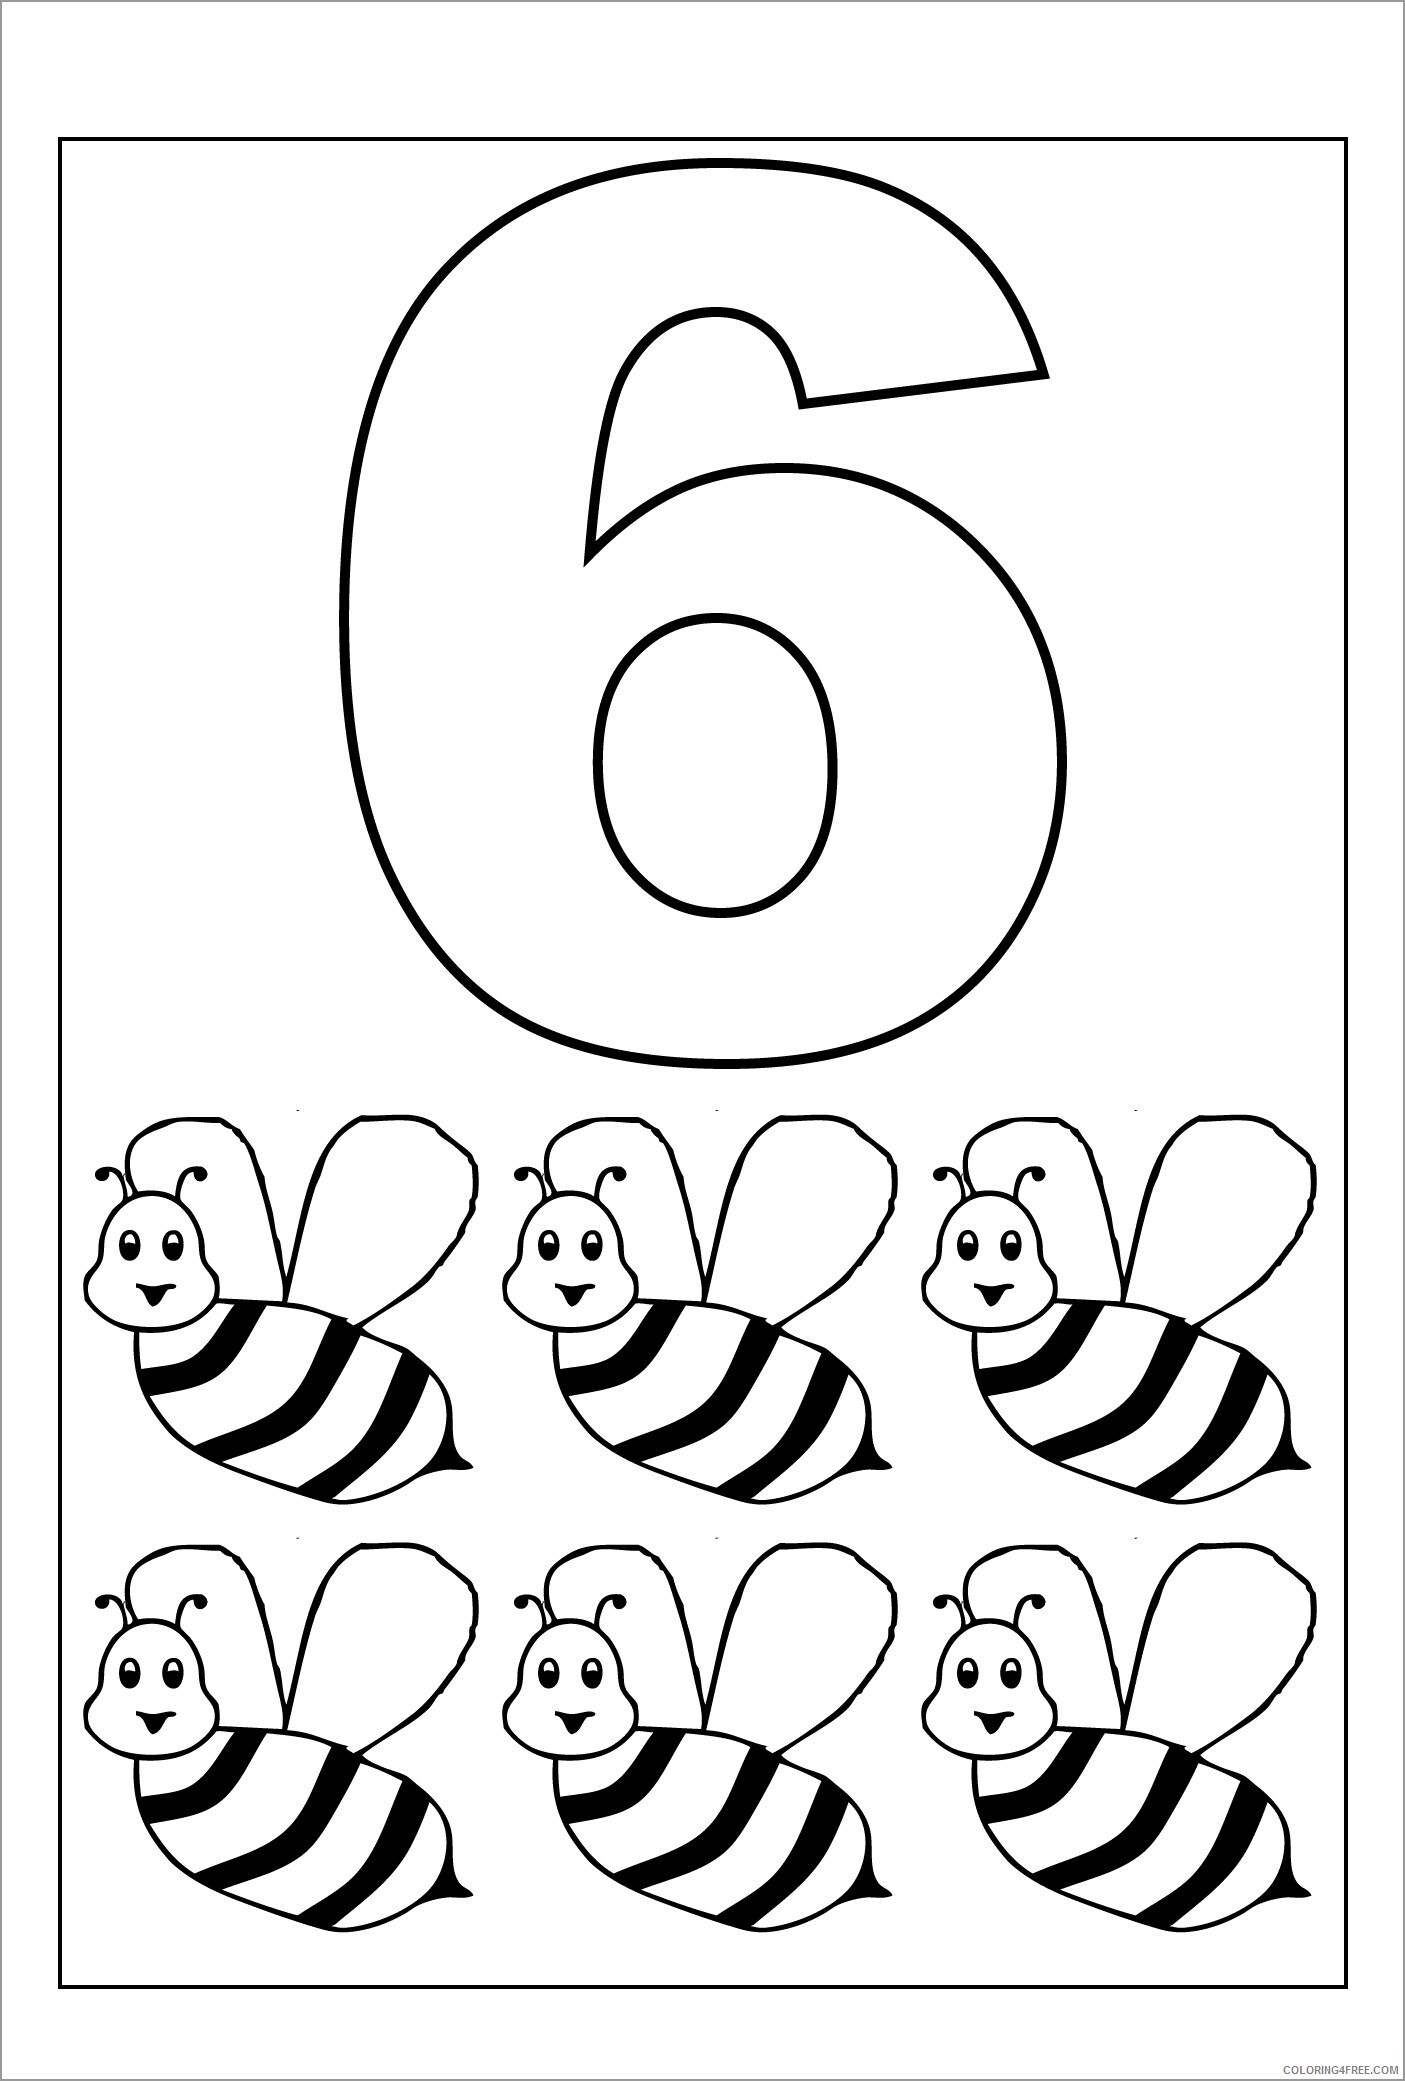 Bee Coloring Pages Animal Printable Sheets number 6 bees 2021 0412 Coloring4free